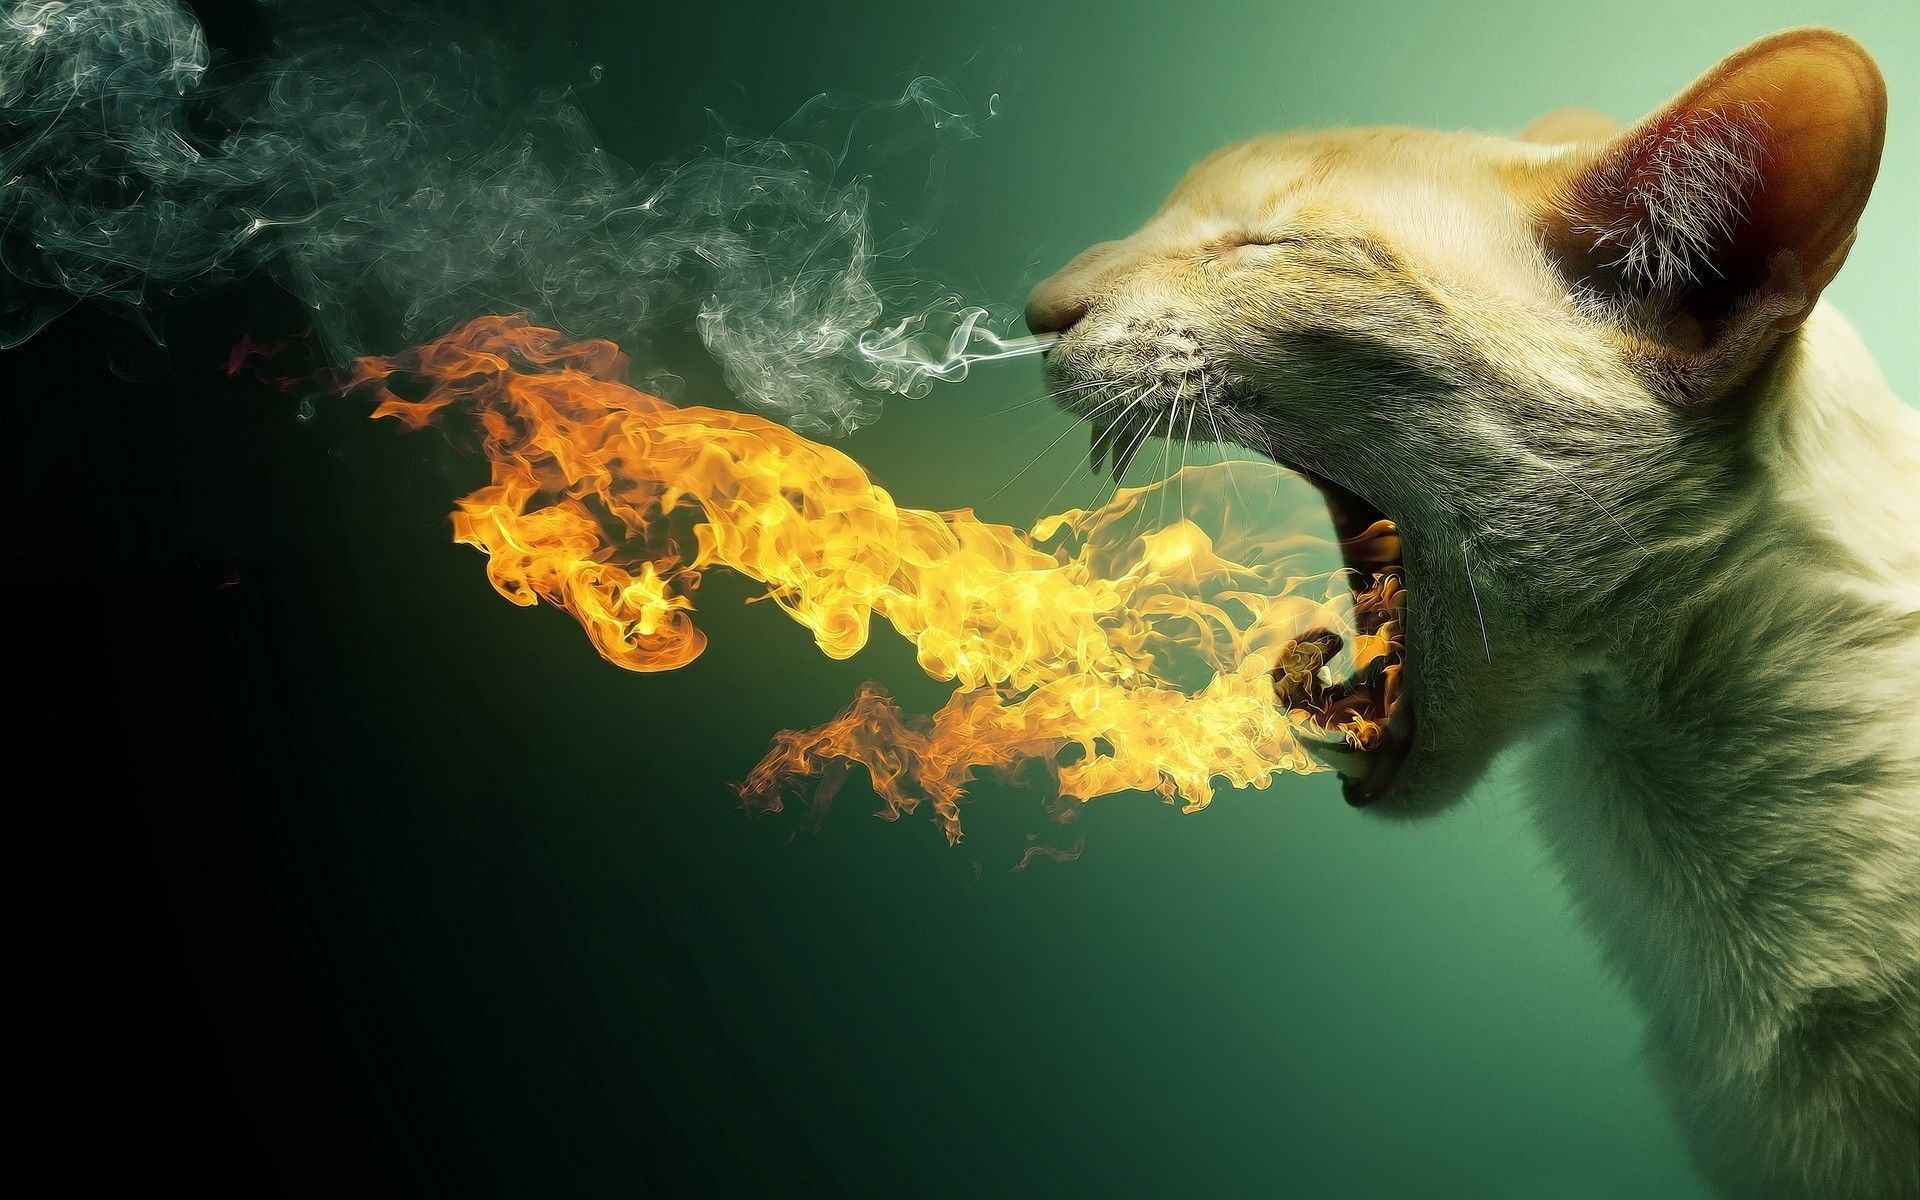 Fire breathing cat. Cool Abstract Wallpaper. HD Wallpaper Download for iPad and iPhone Widescreen 2160p UHD 4K HD 16:9 1. Cat wallpaper, Cat breath, Wallpaper pc